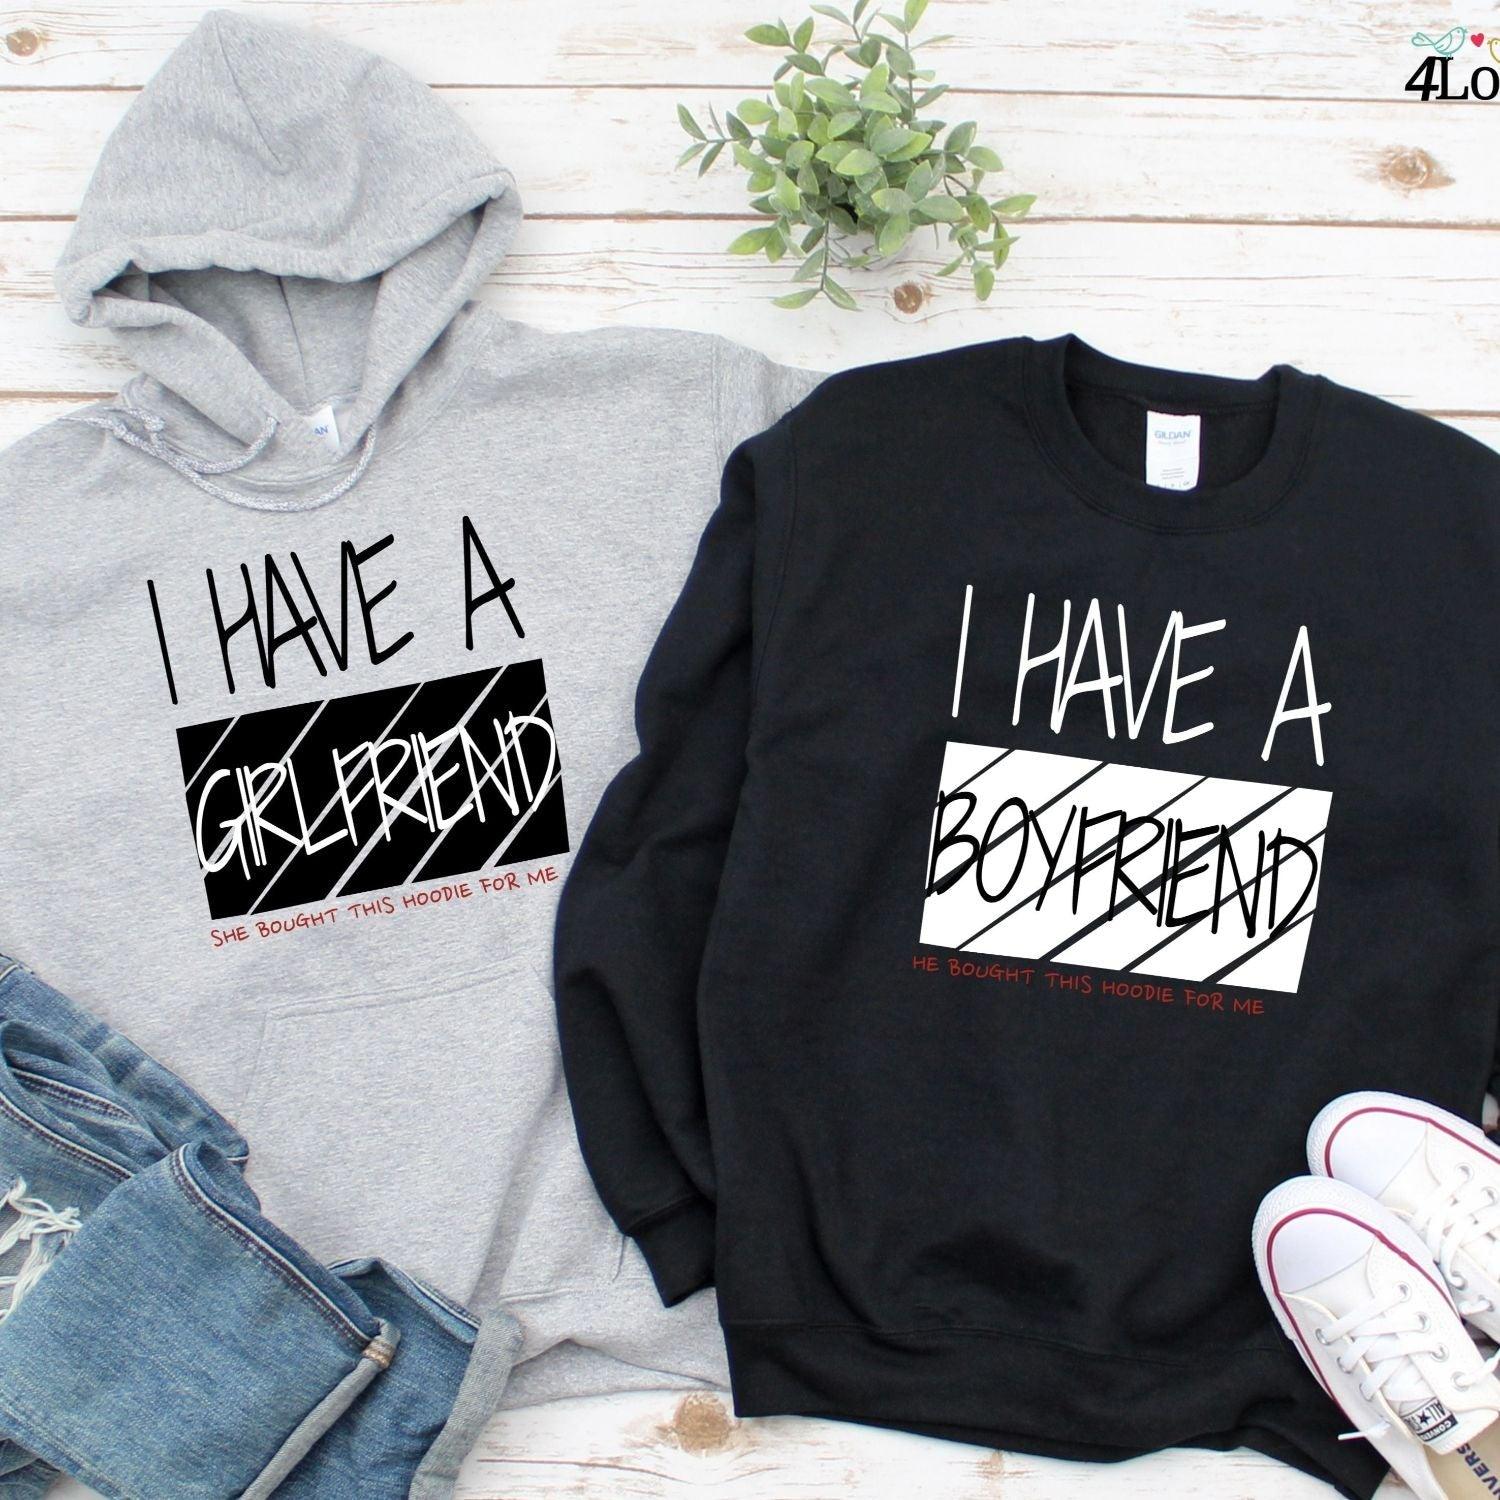 Funny Matching Set: For BF's Bday, I Have A Girlfriend/Boyfriend Outfit! - 4Lovebirds